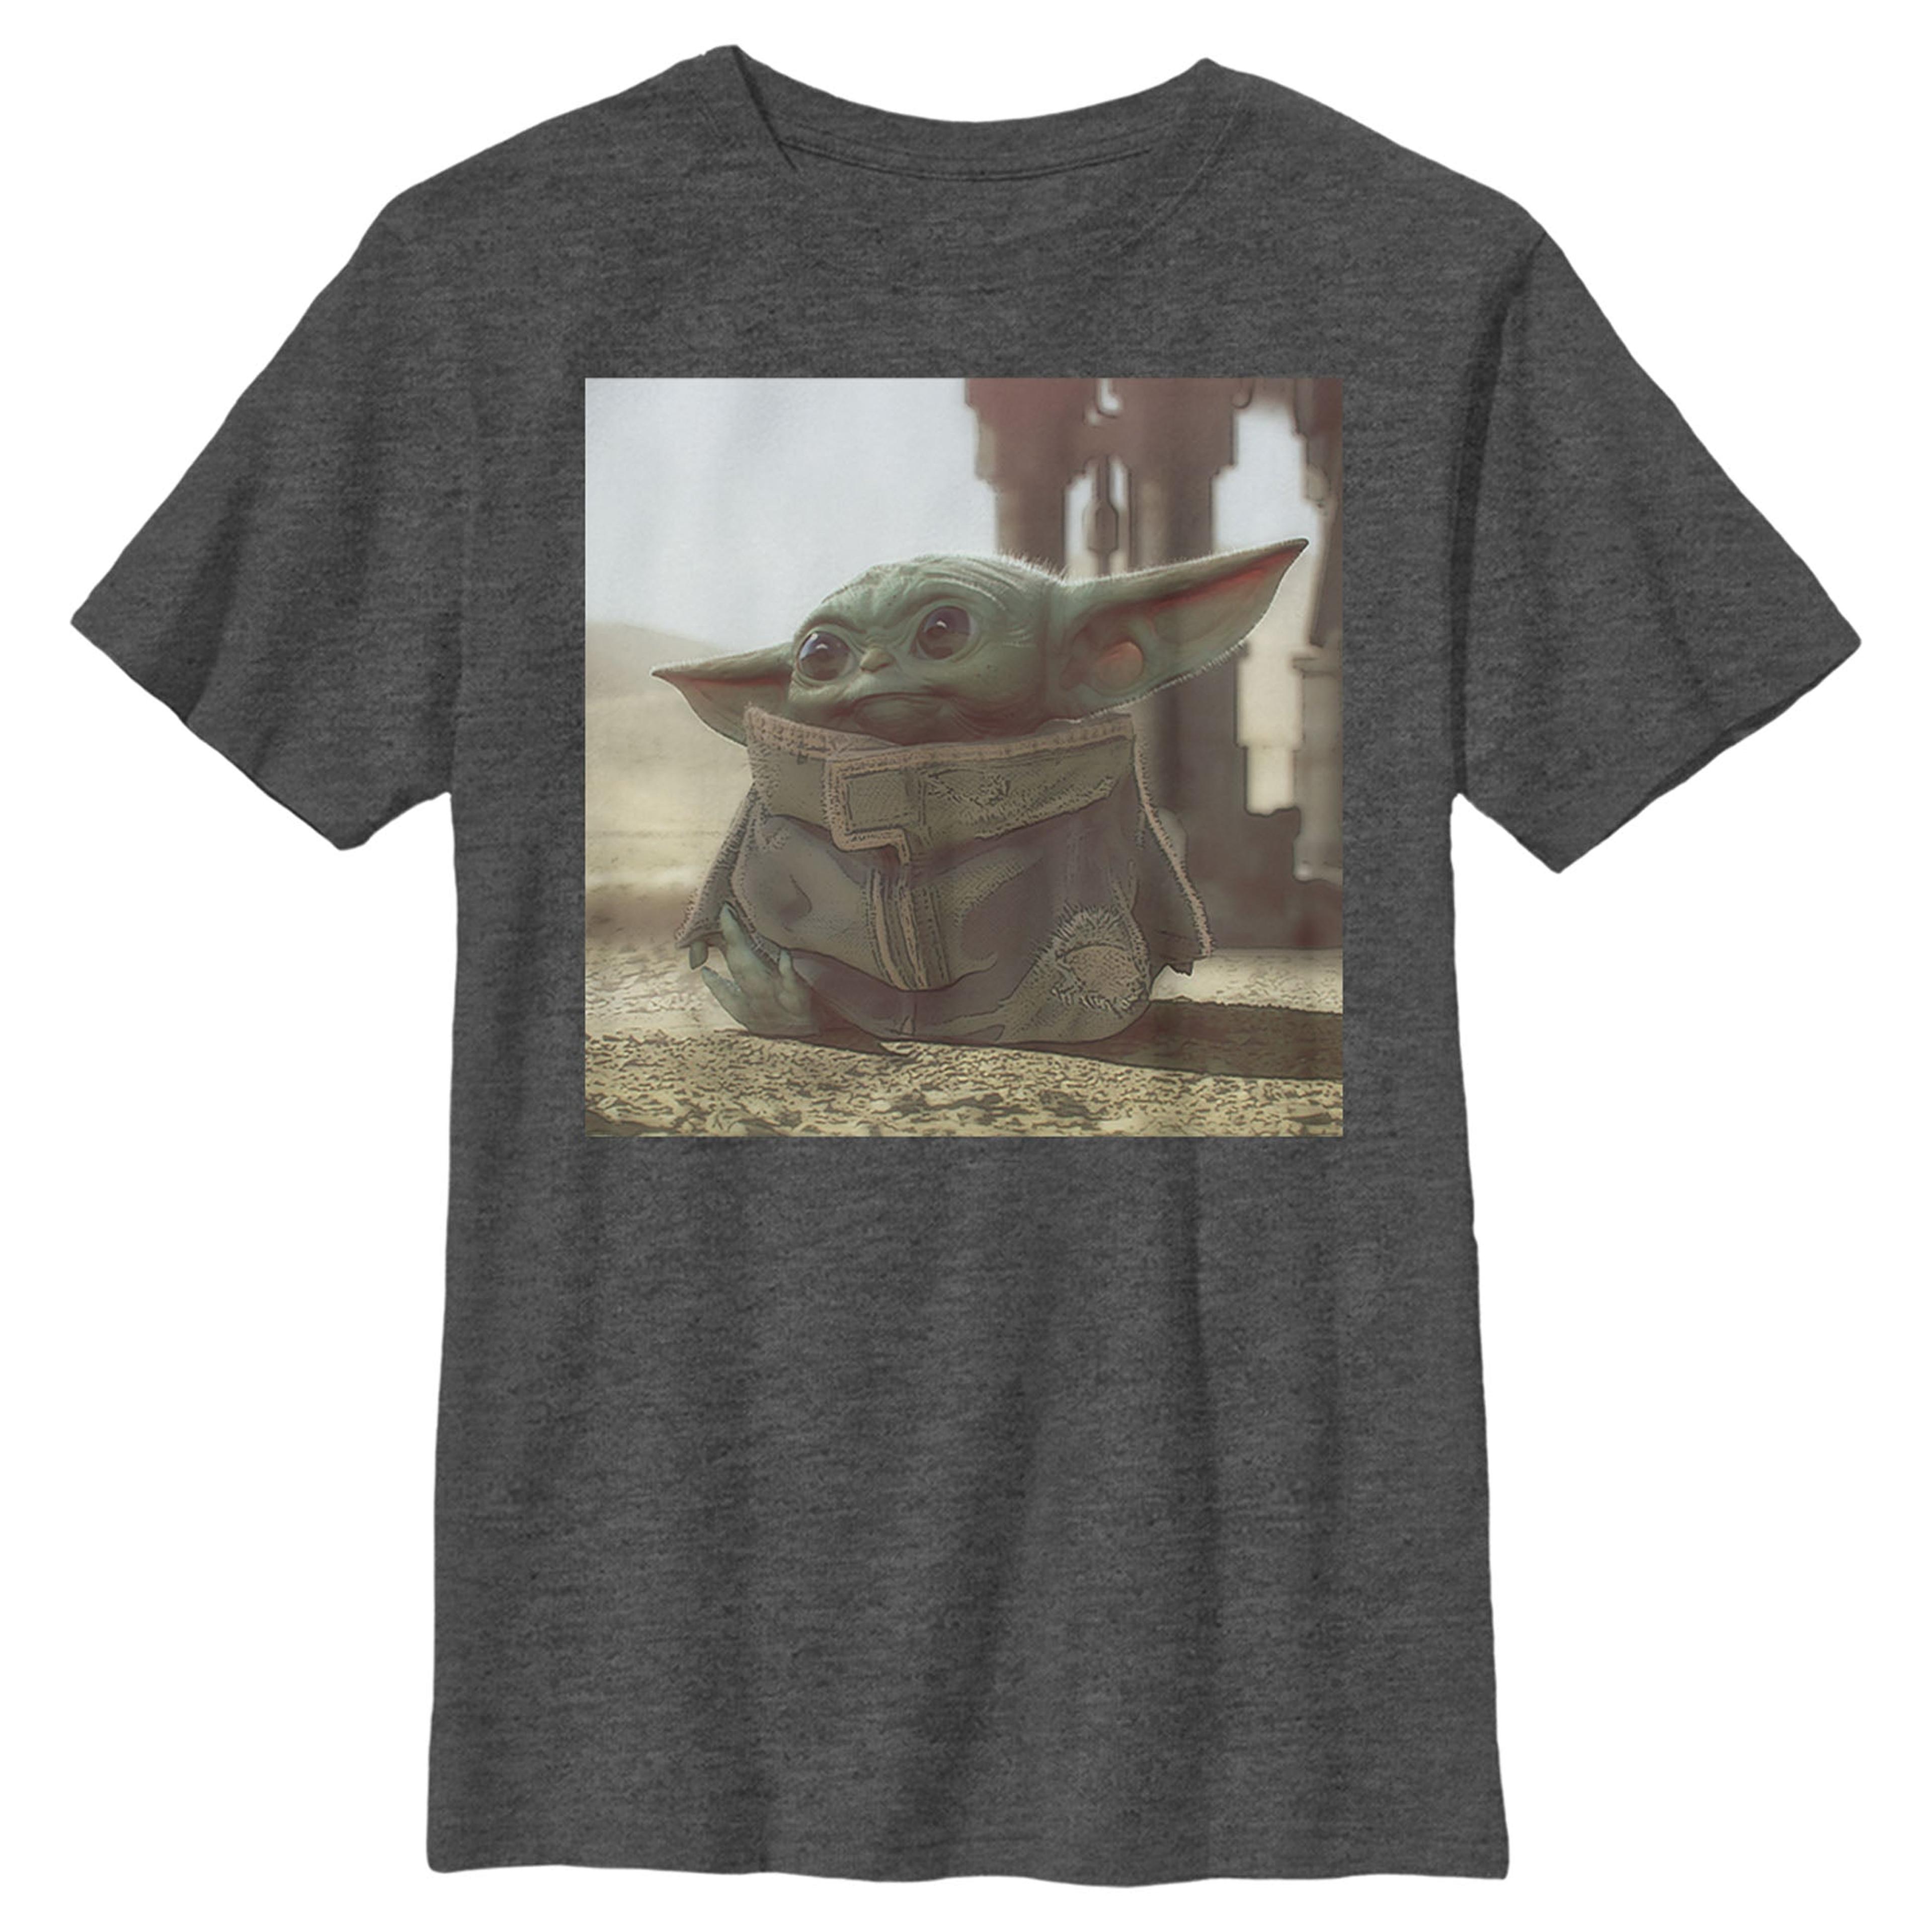 Alternate View 7 of Boy's Star Wars: The Mandalorian The Child Square Frame T-Shirt